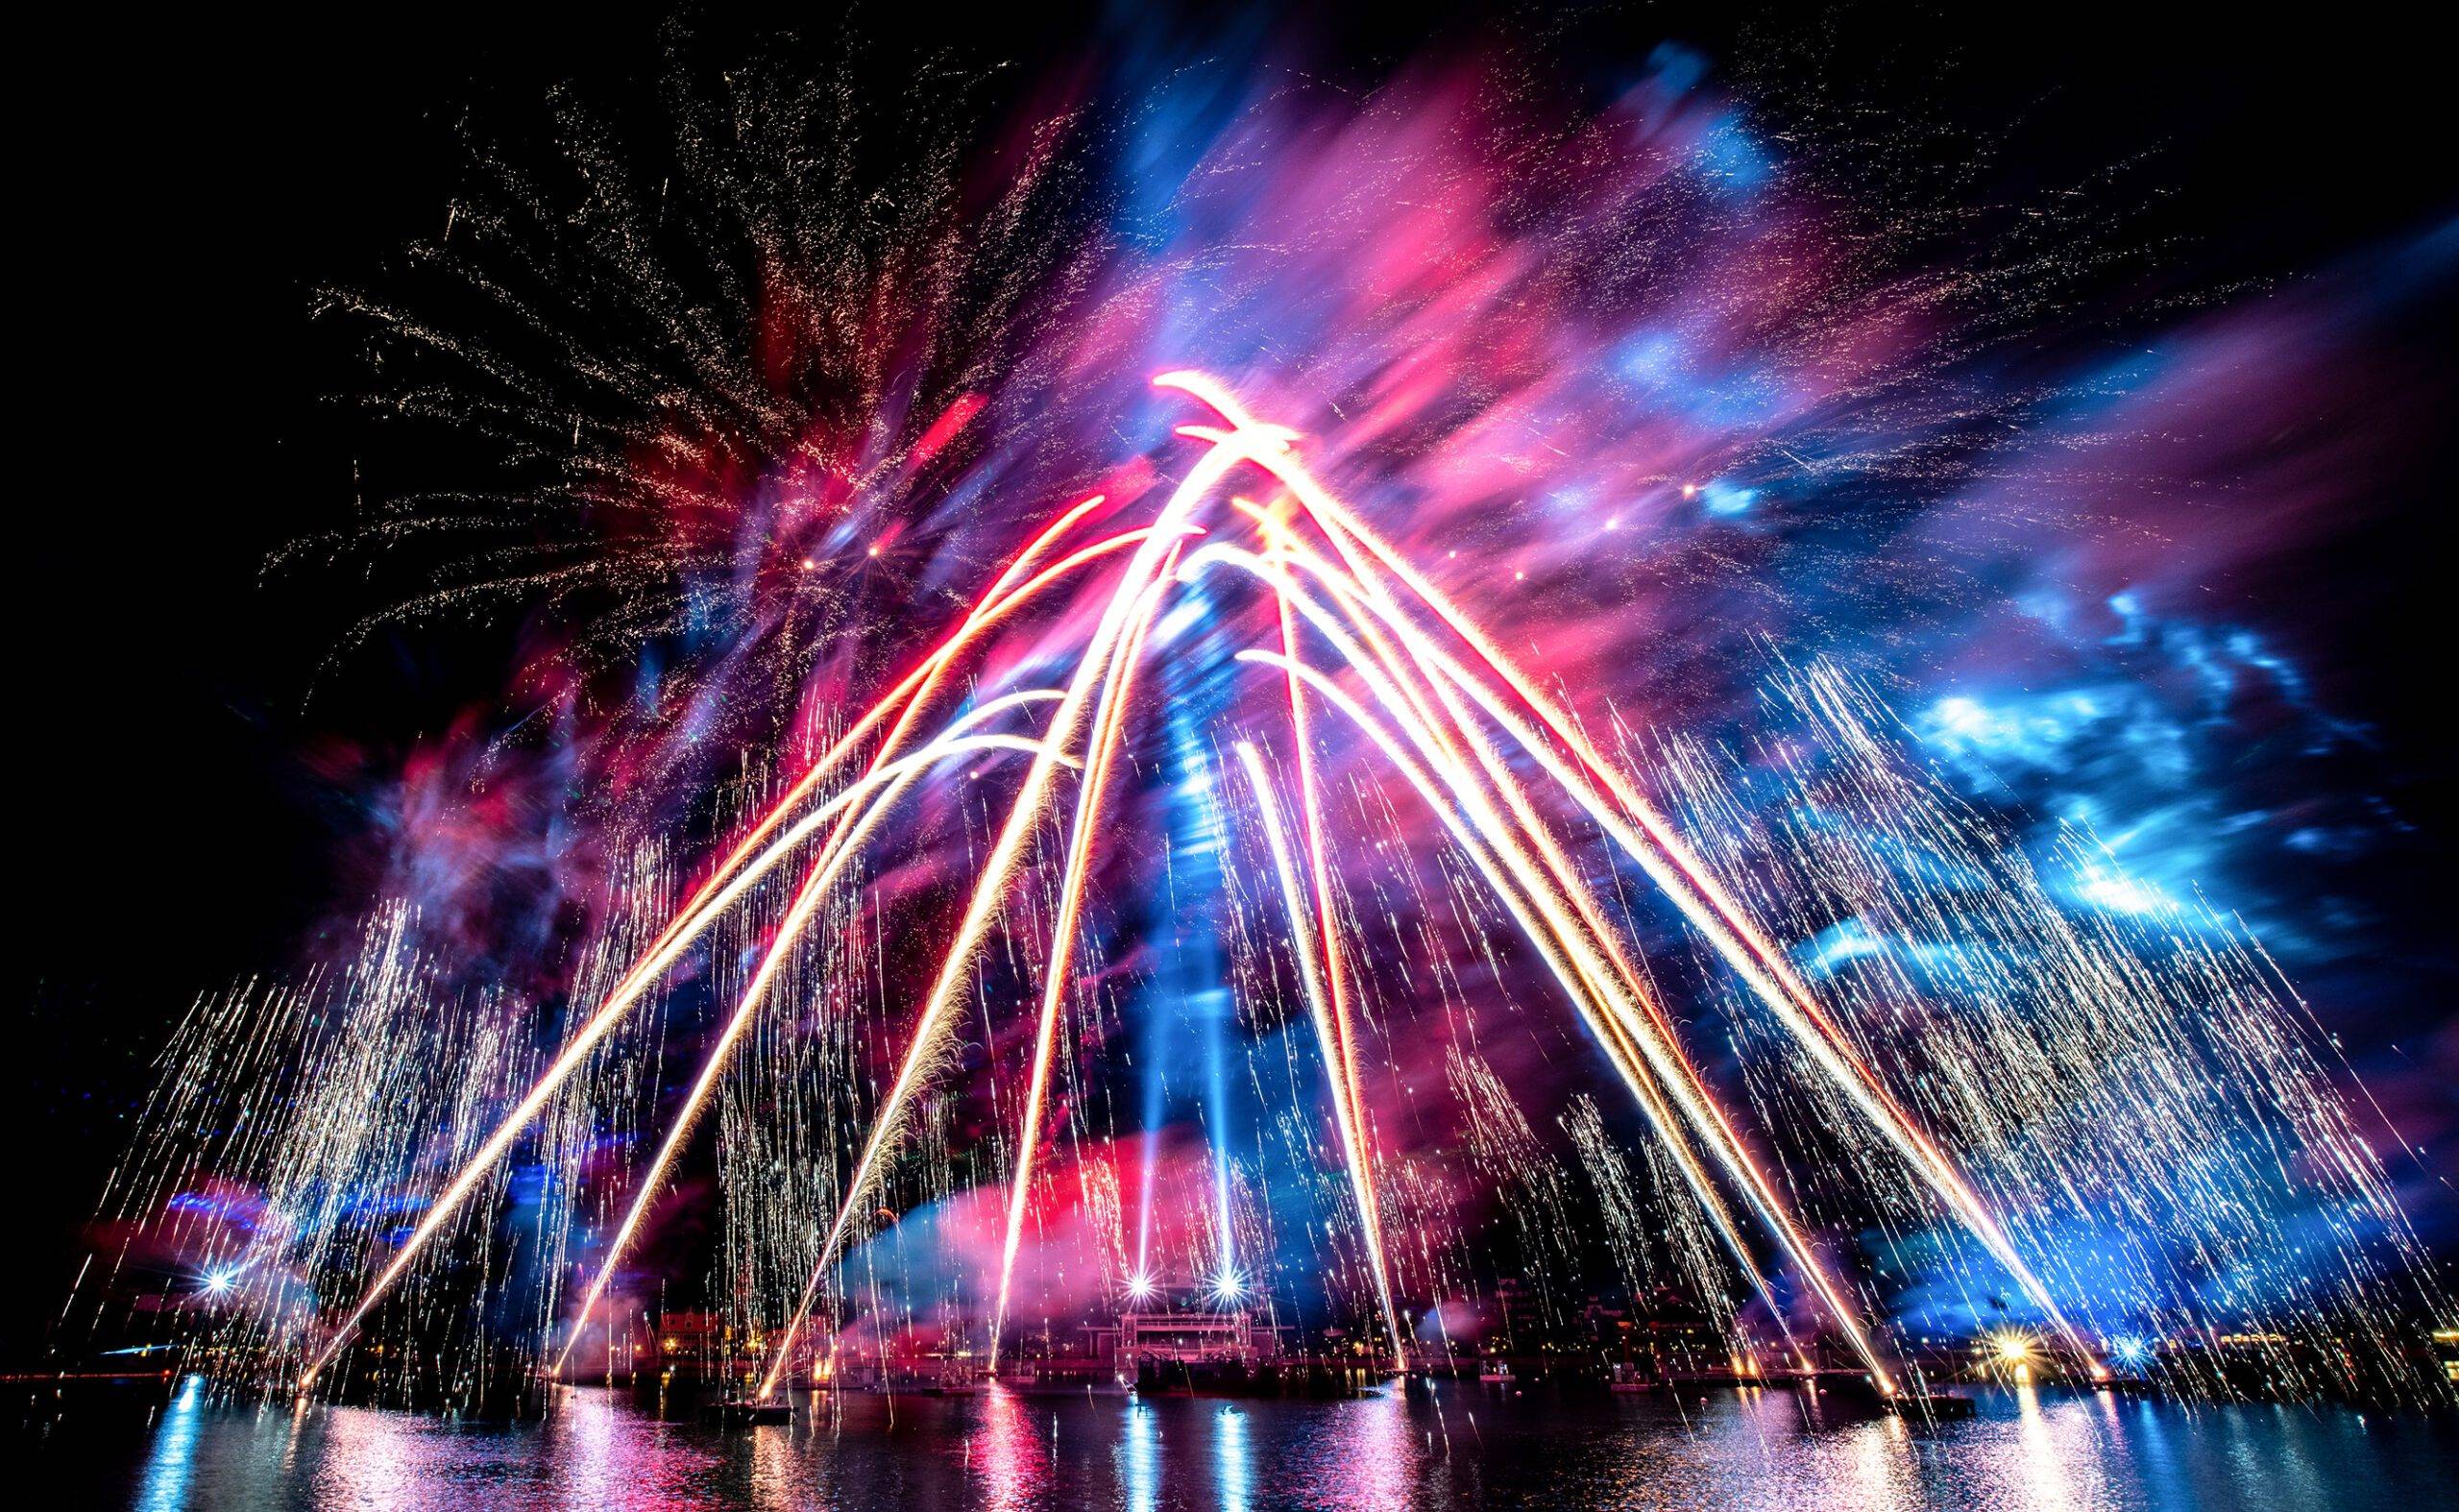 EPCOT Forever confirmed to return to Walt Disney World for a third time in April 2023